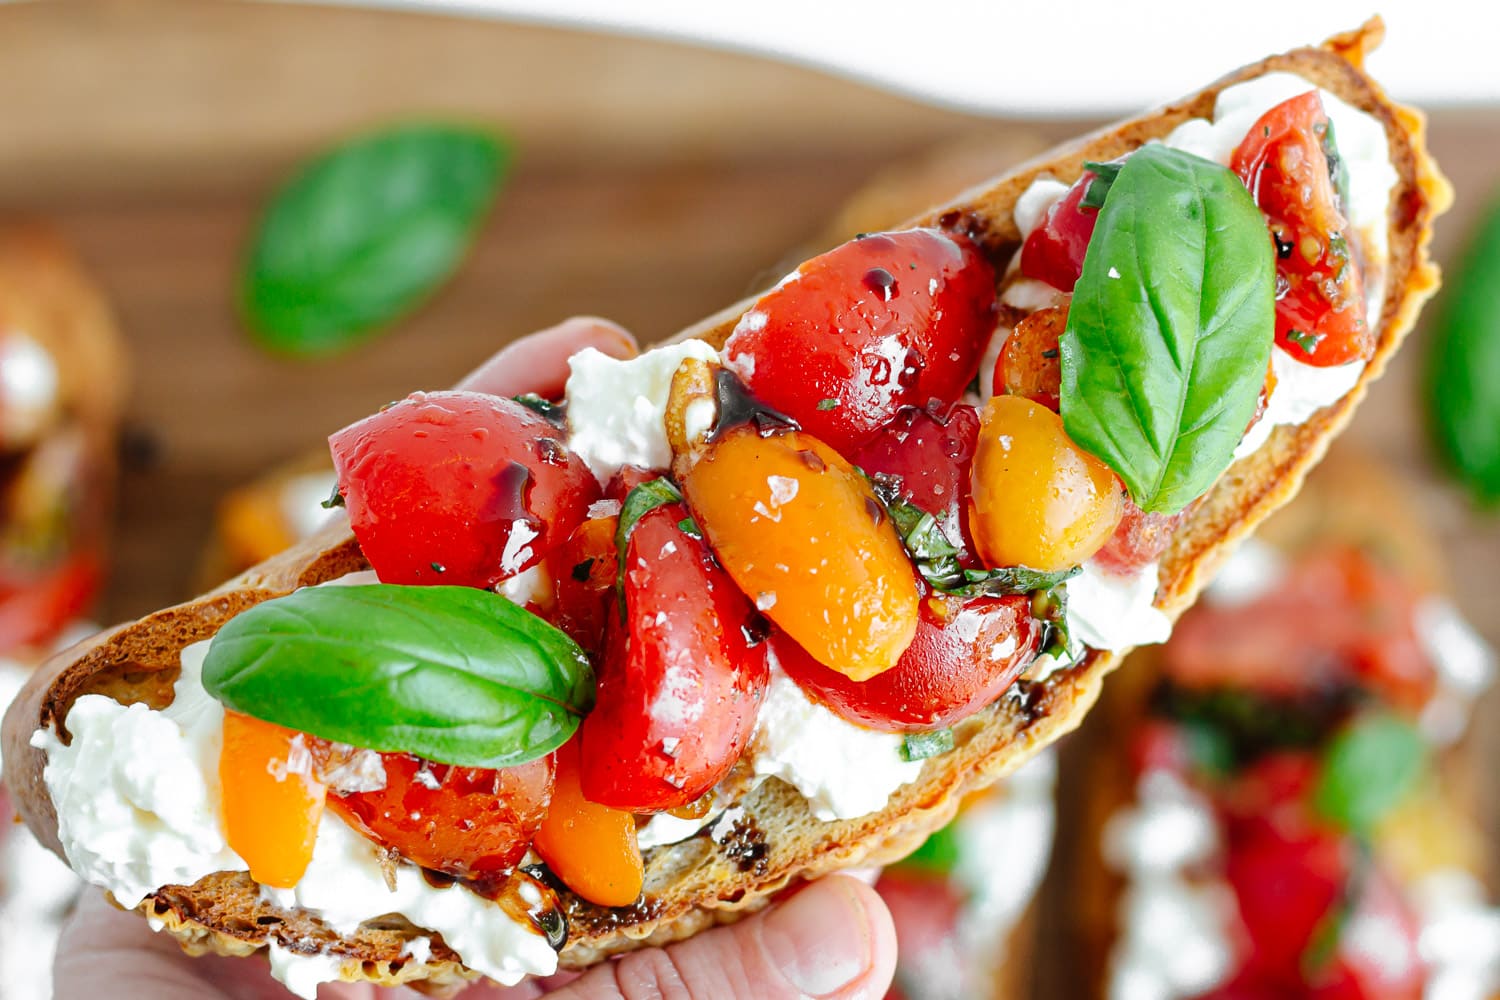 Hand holding burrata toast with tomato basil topping.